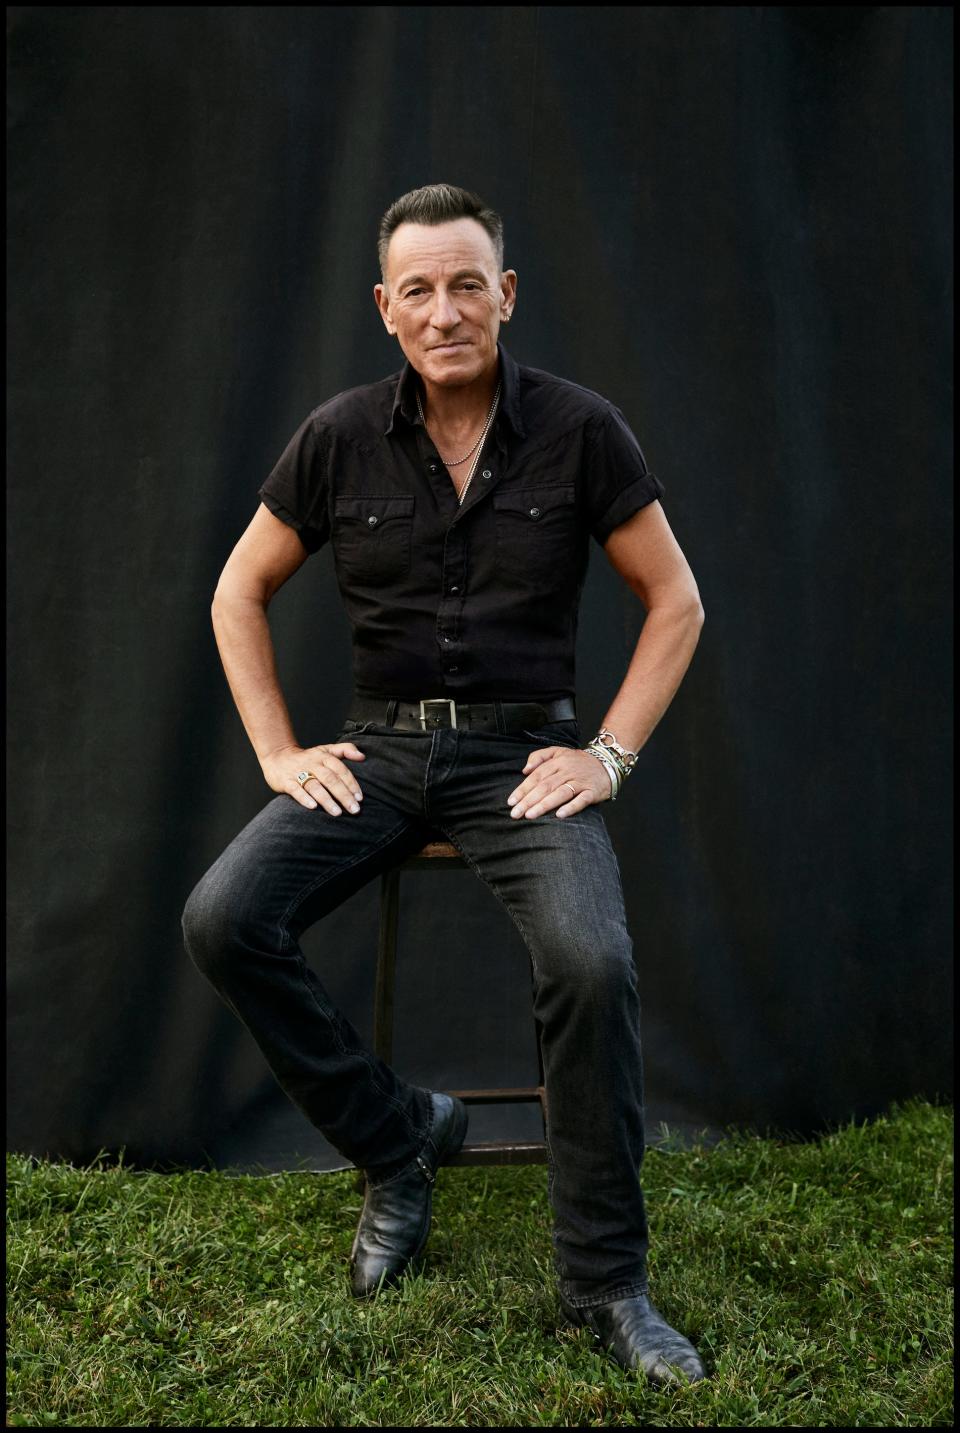 Bruce Springsteen promotional pic for "Only the Strong Survive" by Danny Clinch.